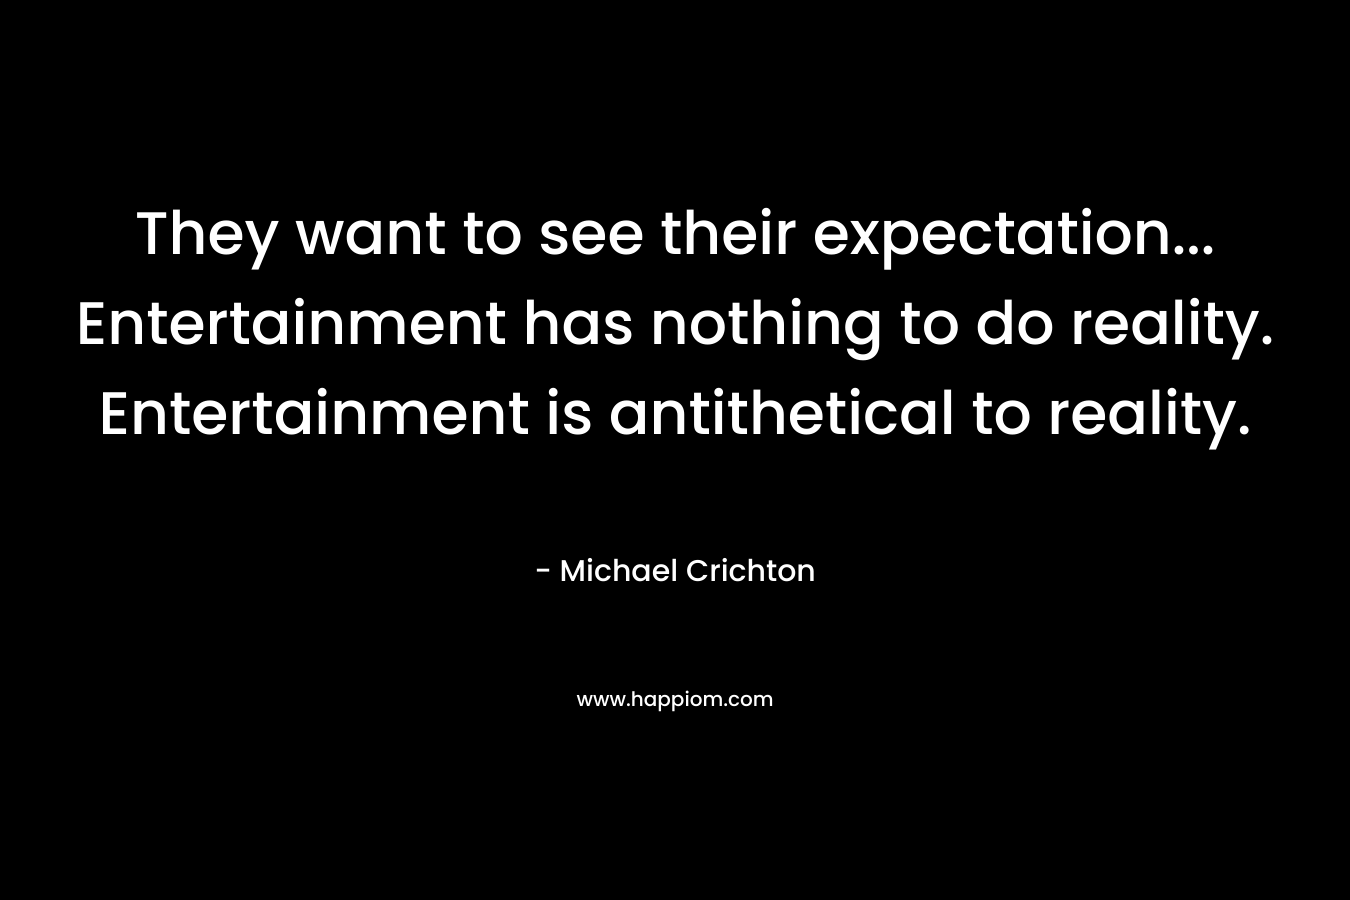 They want to see their expectation... Entertainment has nothing to do reality. Entertainment is antithetical to reality.